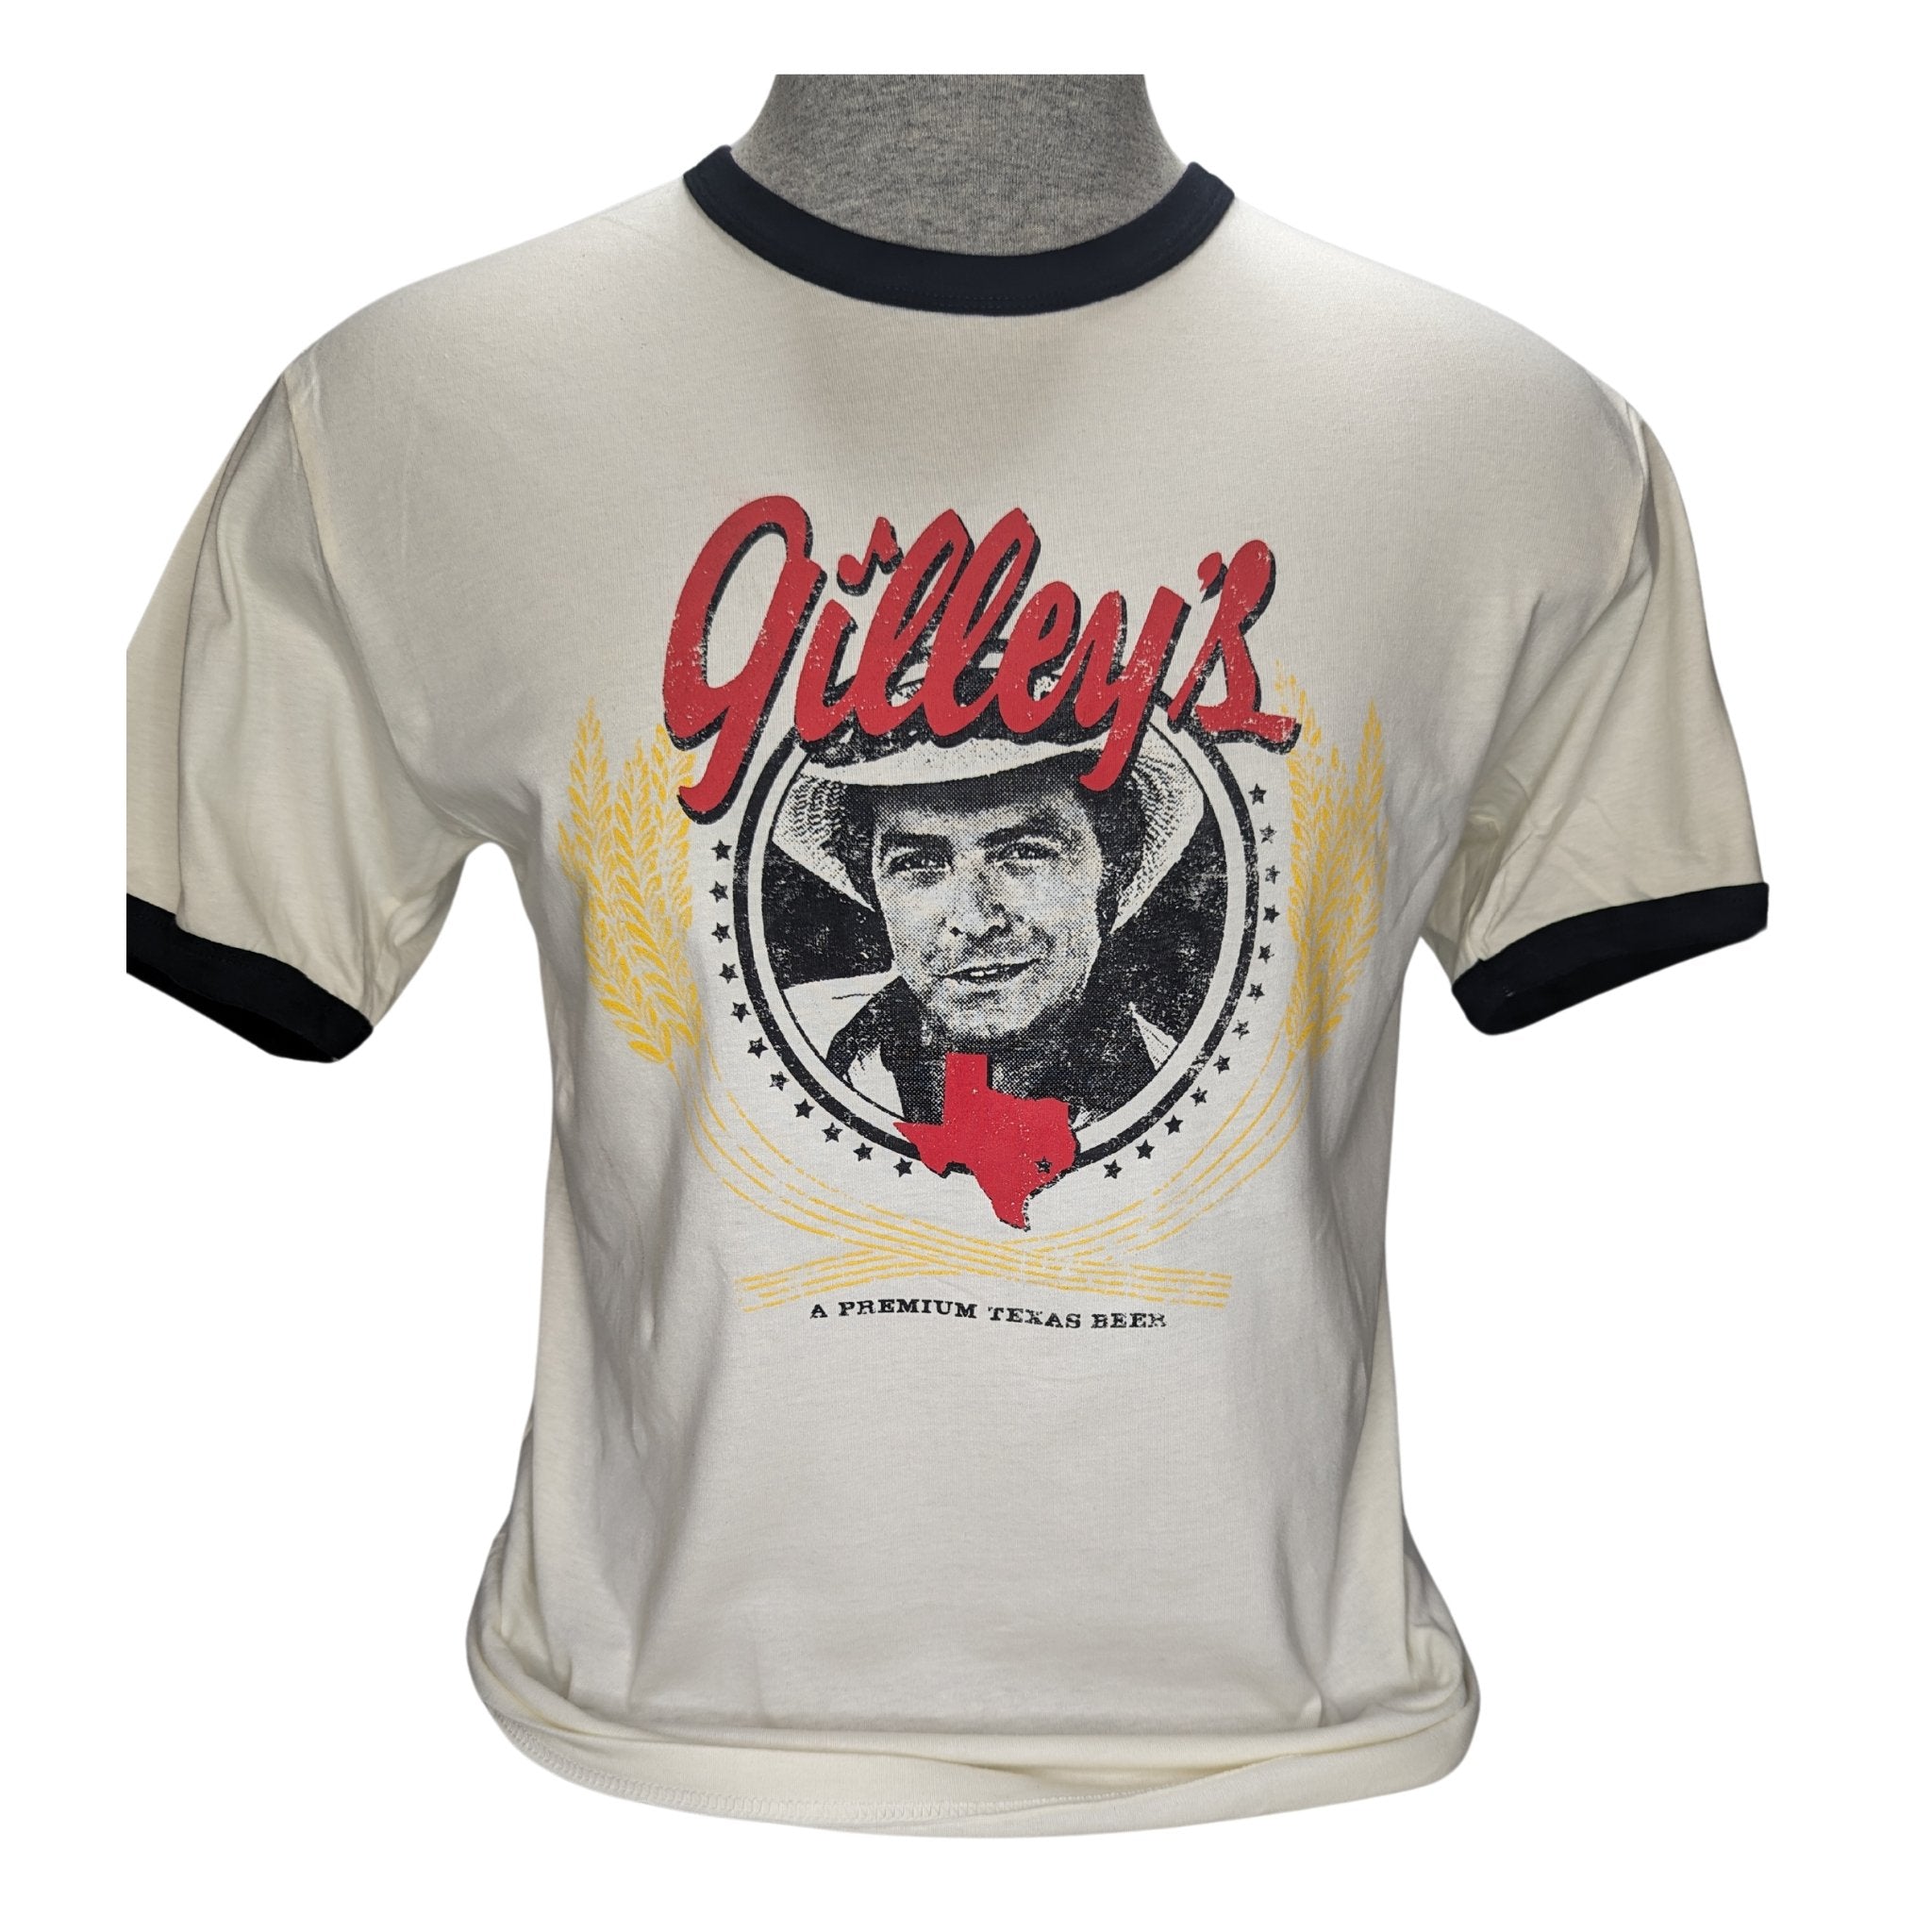 Gilley's Premium Texas Beer Ringer Shirt - Off-white shirt with black ringer. Polycotton blend soft style shirt. - Gilley's Food & Beverage